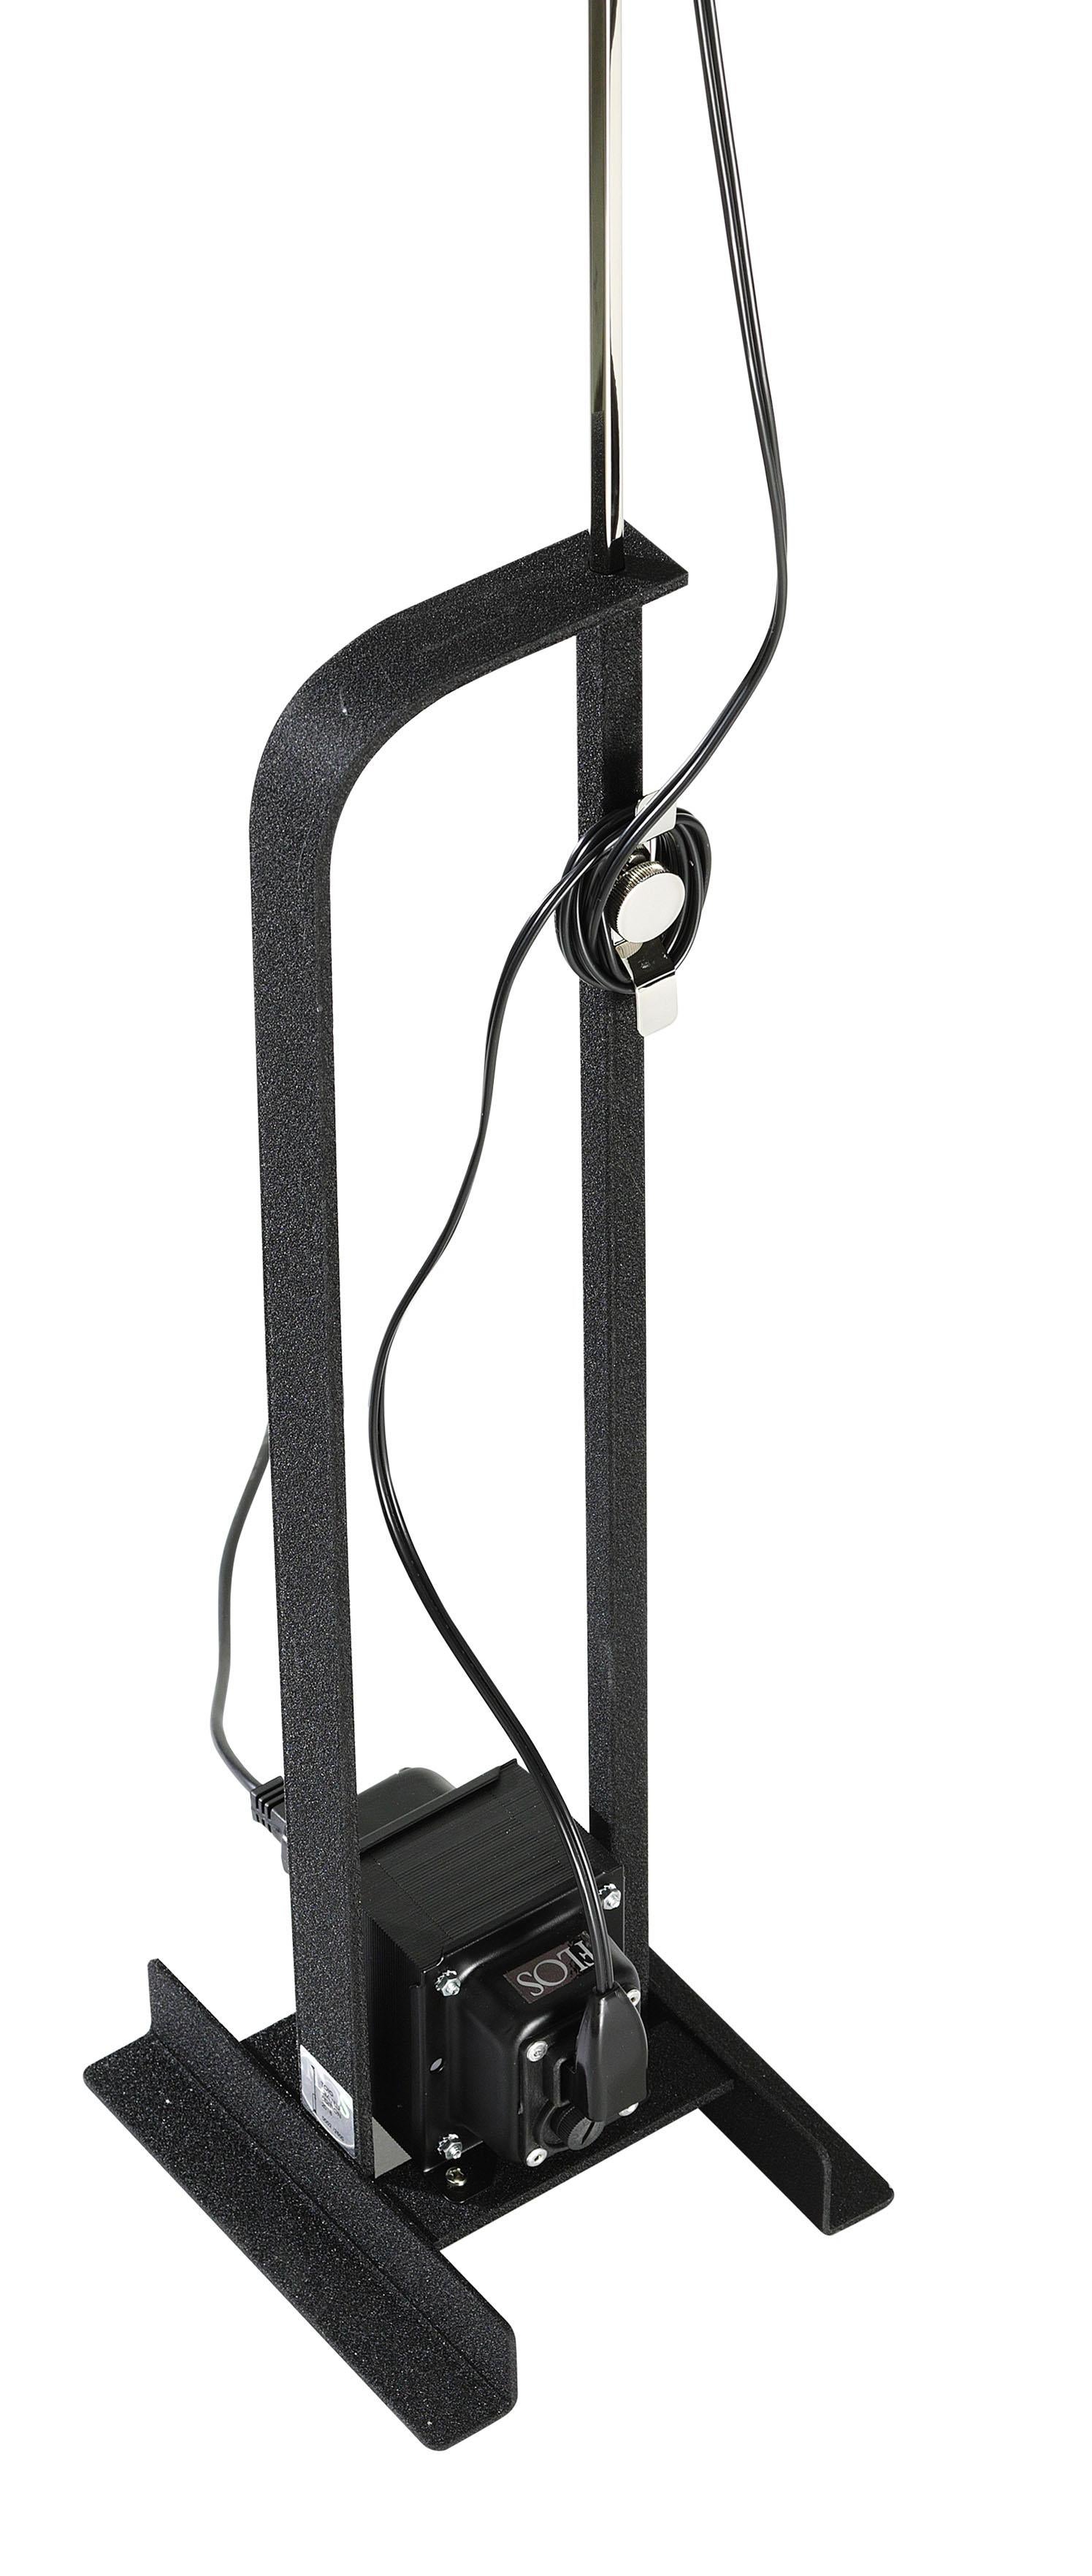 FLOS Limited Edition Toio Lamp in Black For Sale 1